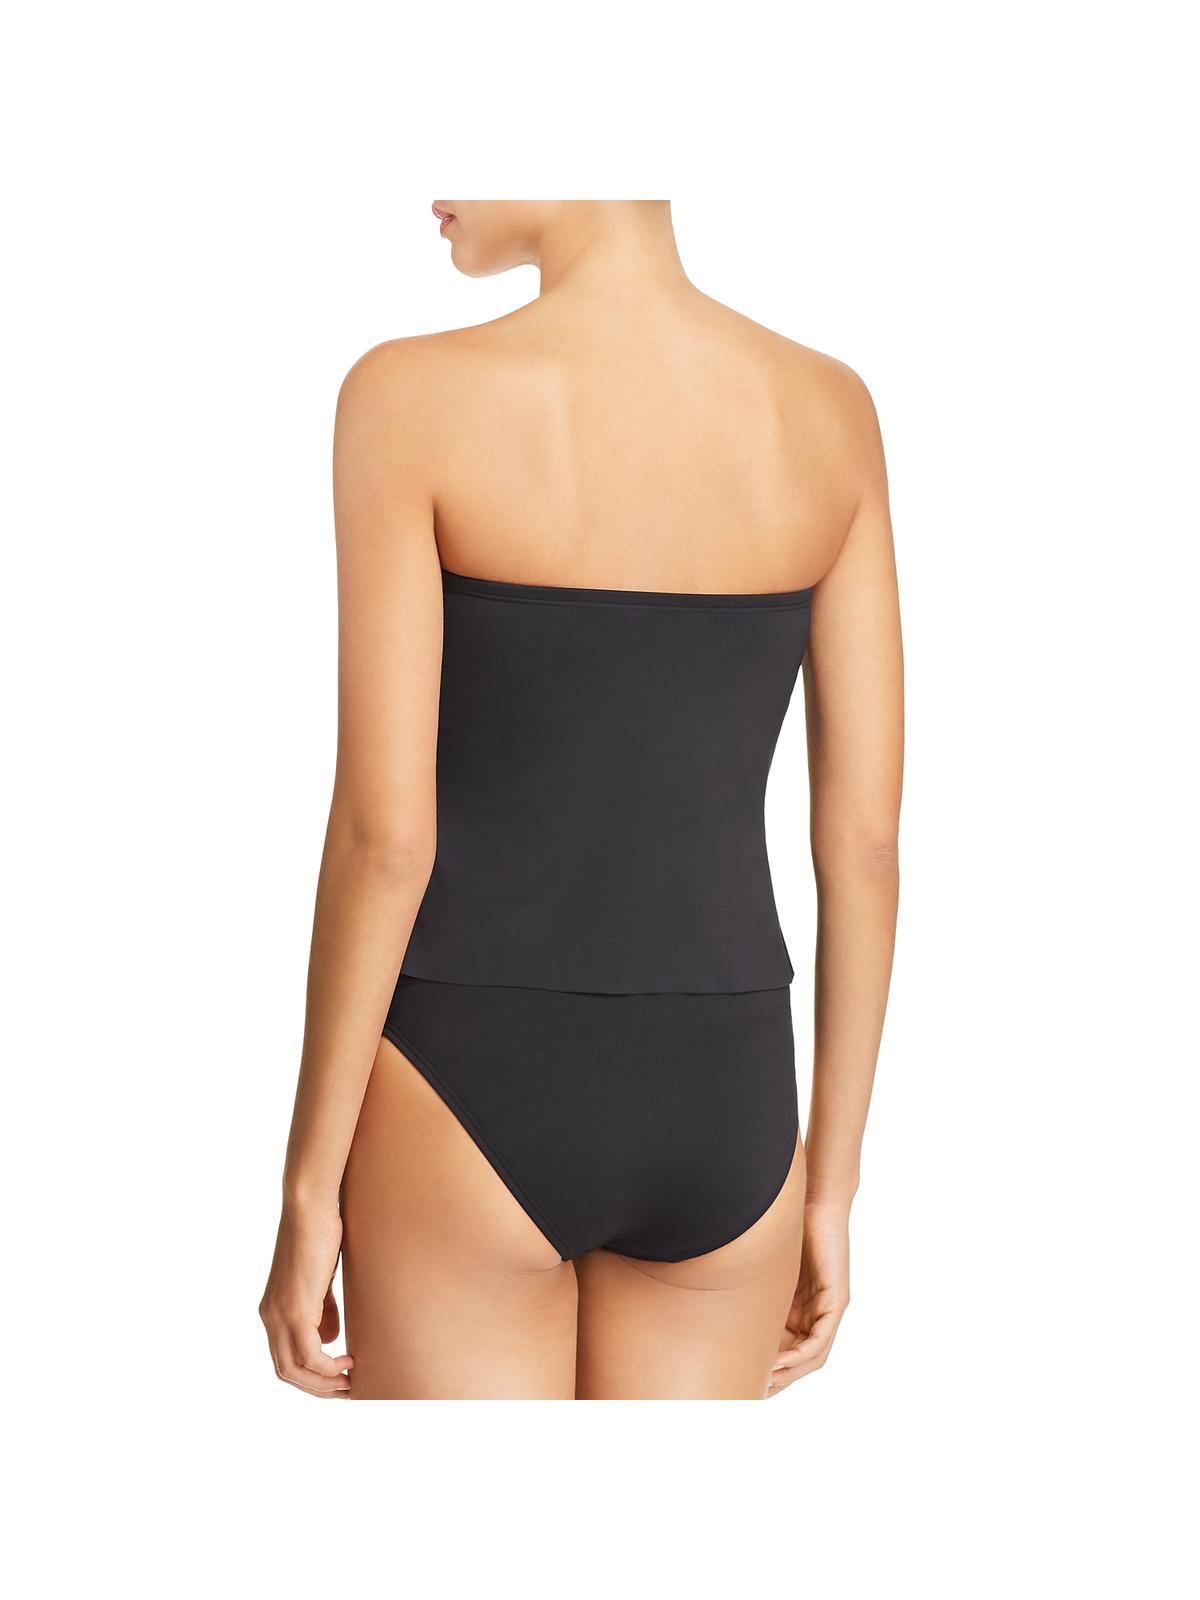 Vince Camuto Womens Halter Ruched Tankini Swim Top - image 2 of 2